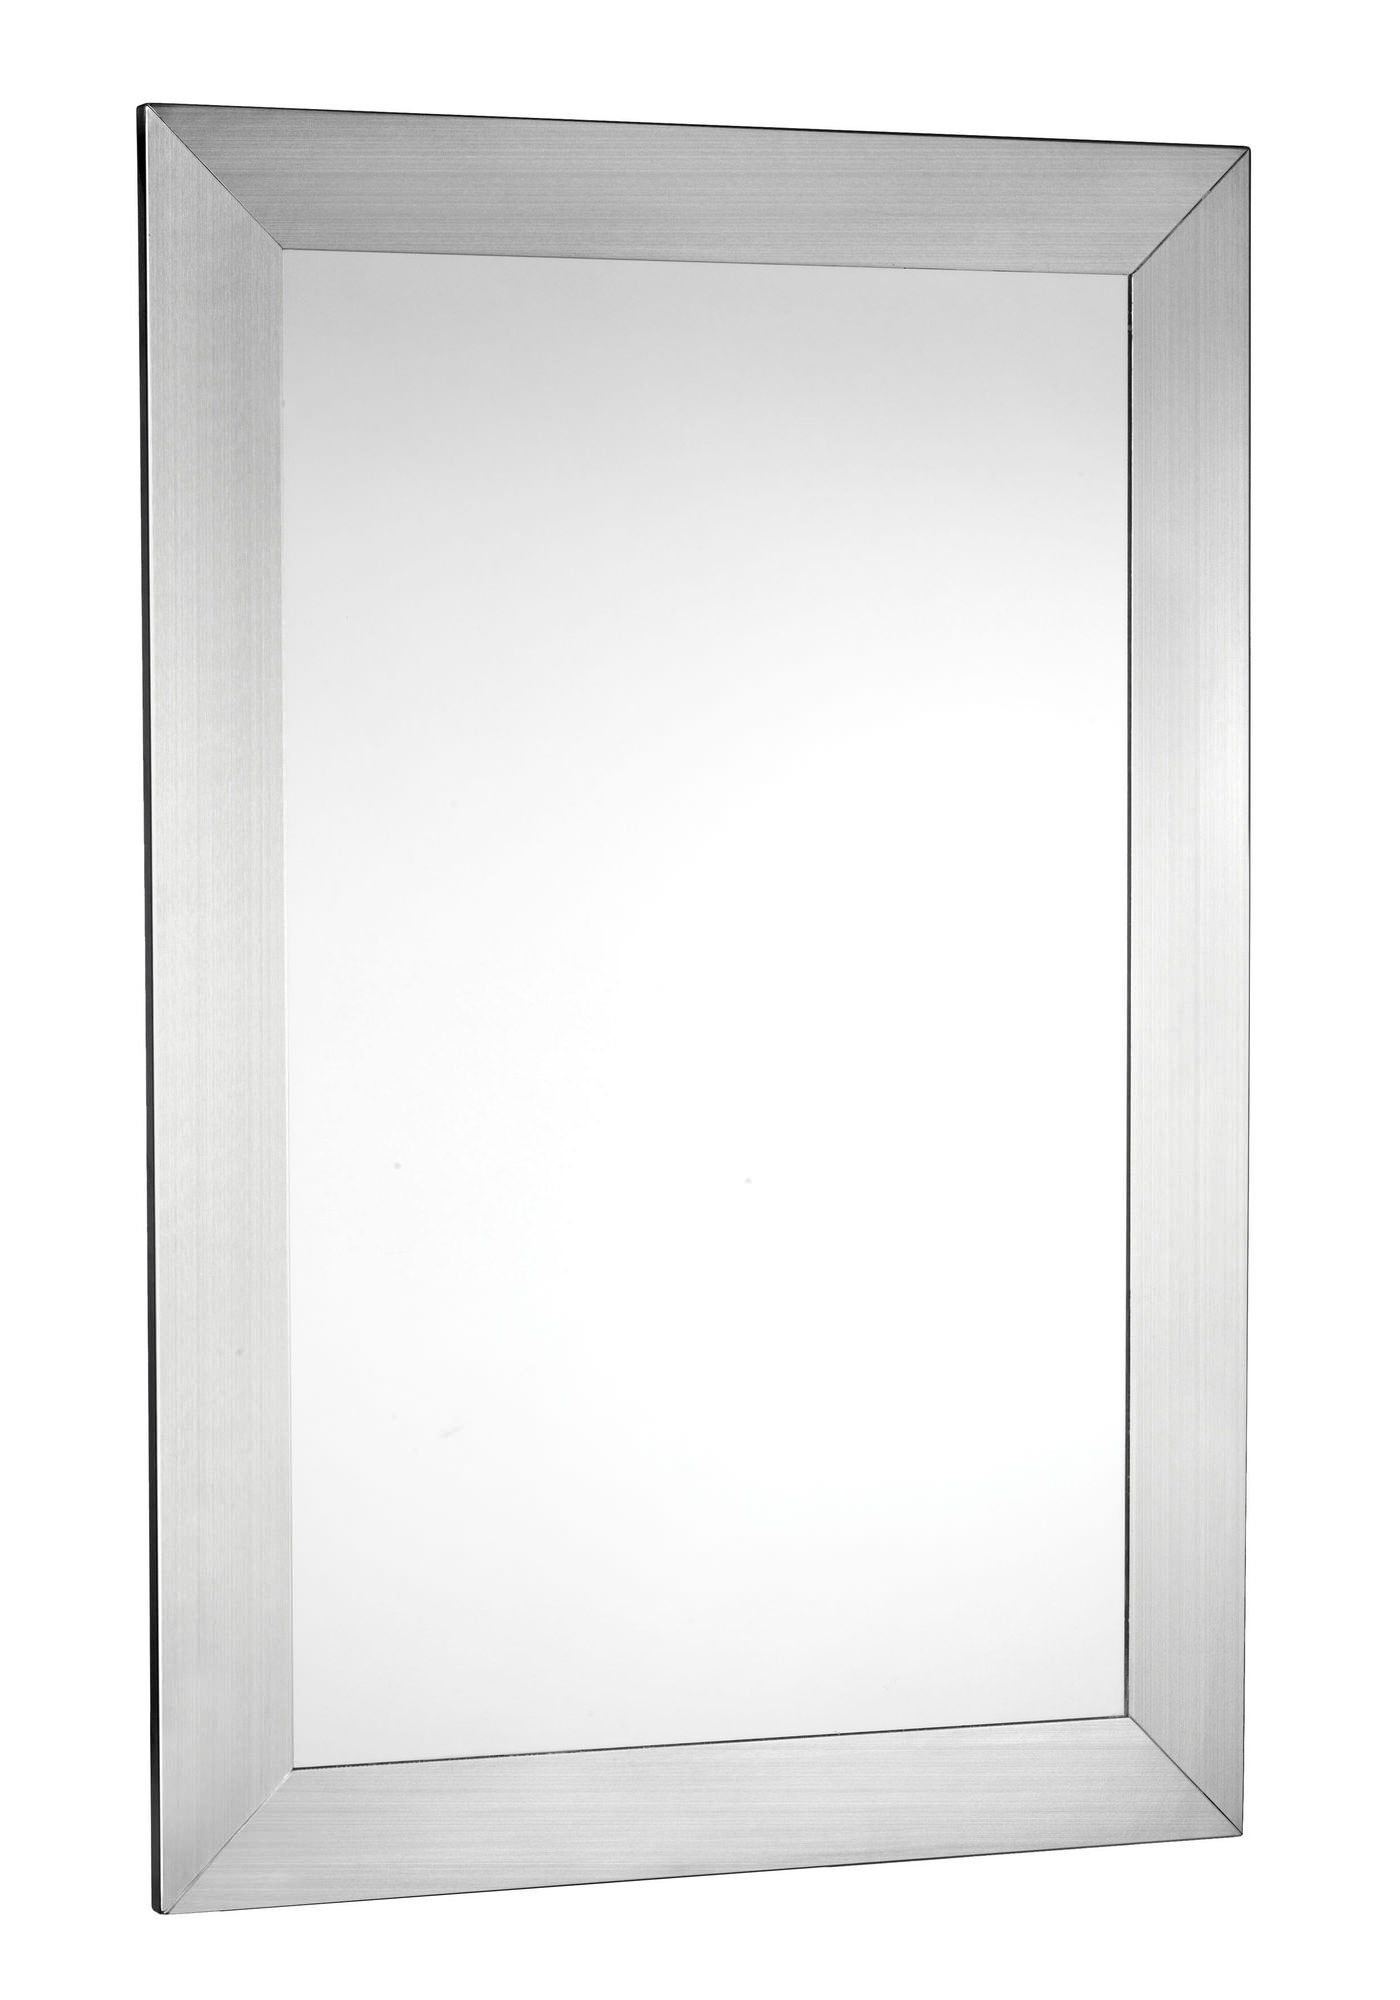 Croydex Parkgate Mirror With Brushed Stainless Steel Frame | Mm701605 Intended For Drake Brushed Steel Wall Mirrors (View 6 of 15)